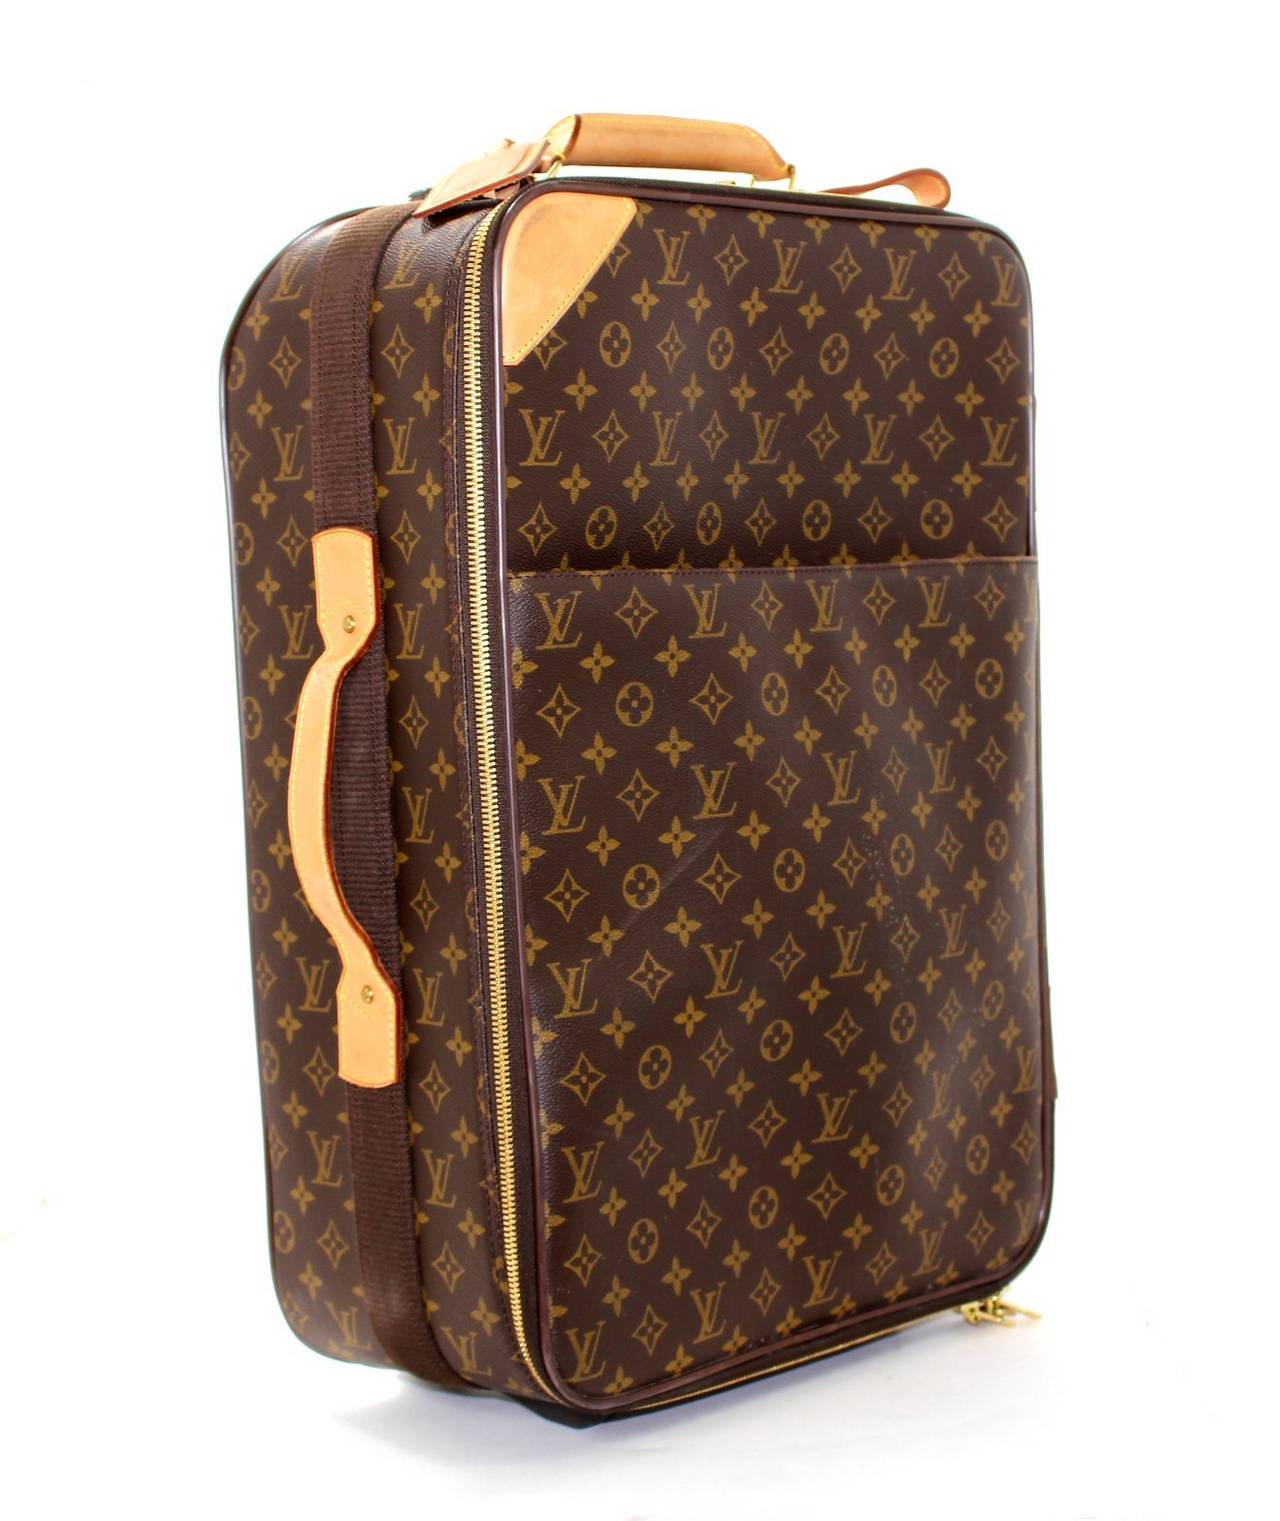 Louis Vuitton Rolling Luggage Reviewed | Paul Smith